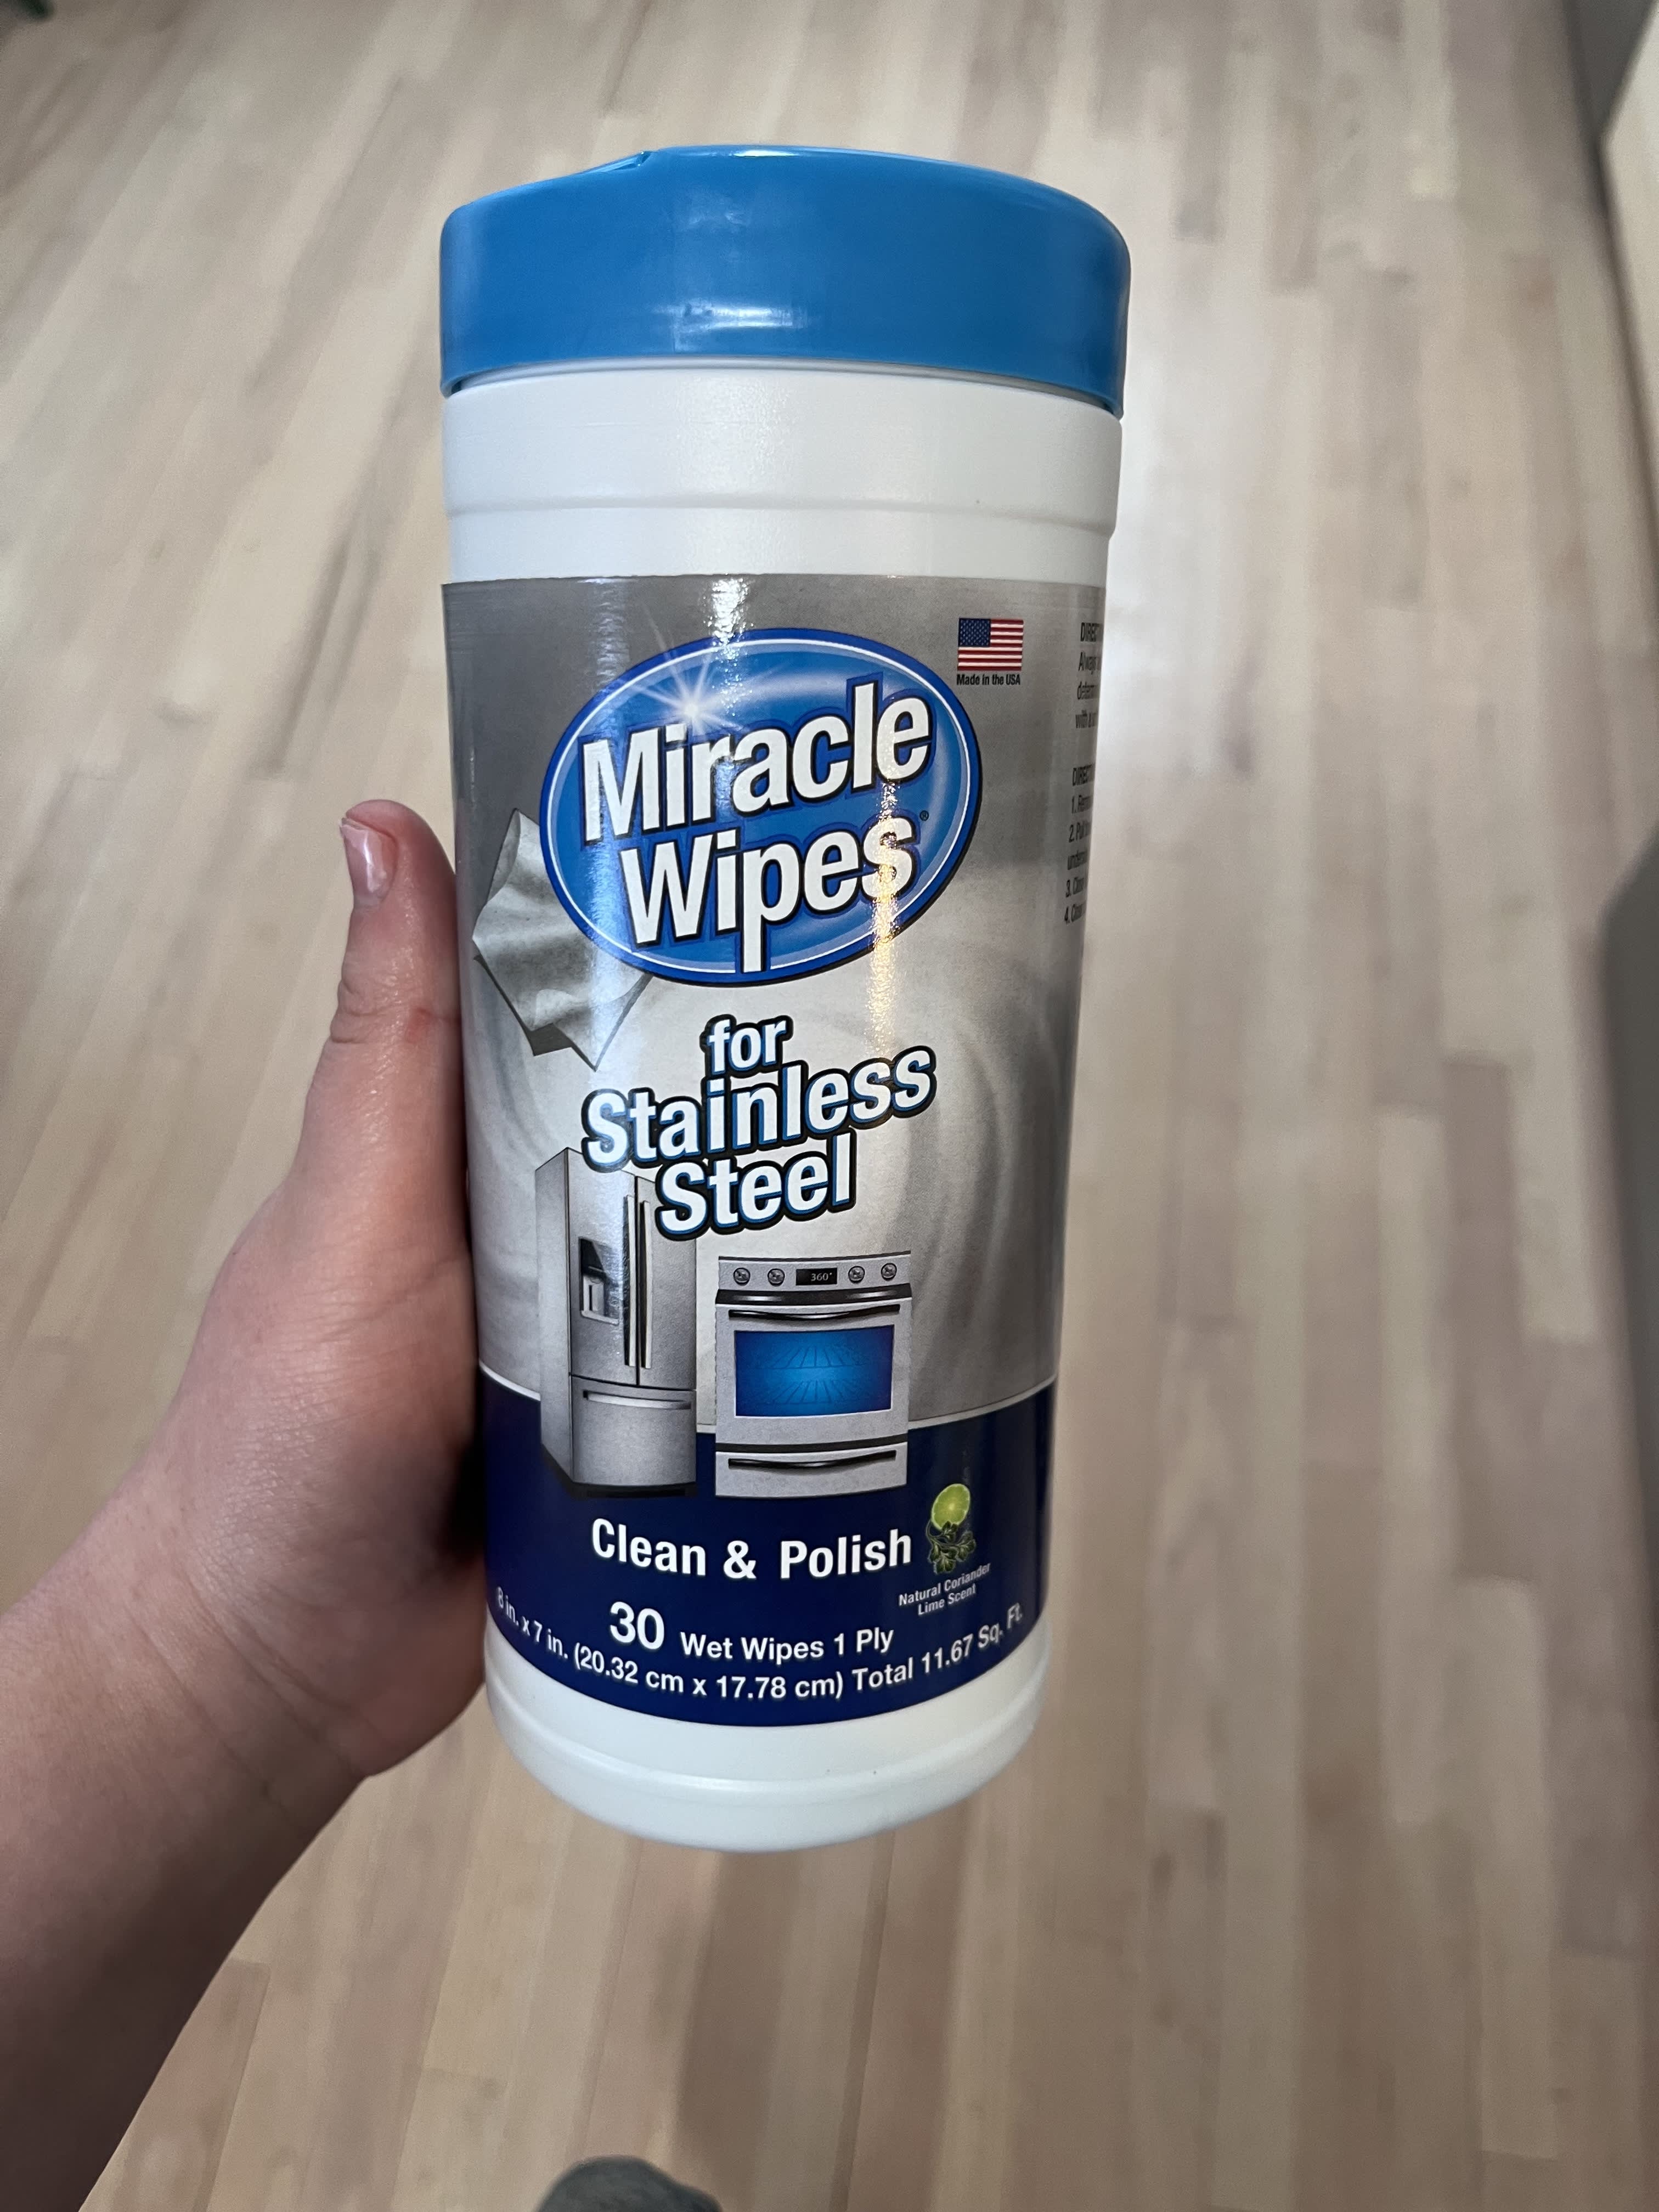 https://cdn.apartmenttherapy.info/image/upload/v1648738162/k/Edit/2022-04-Stainless-Steel-Wipes-Test/MiracleWipes.jpg